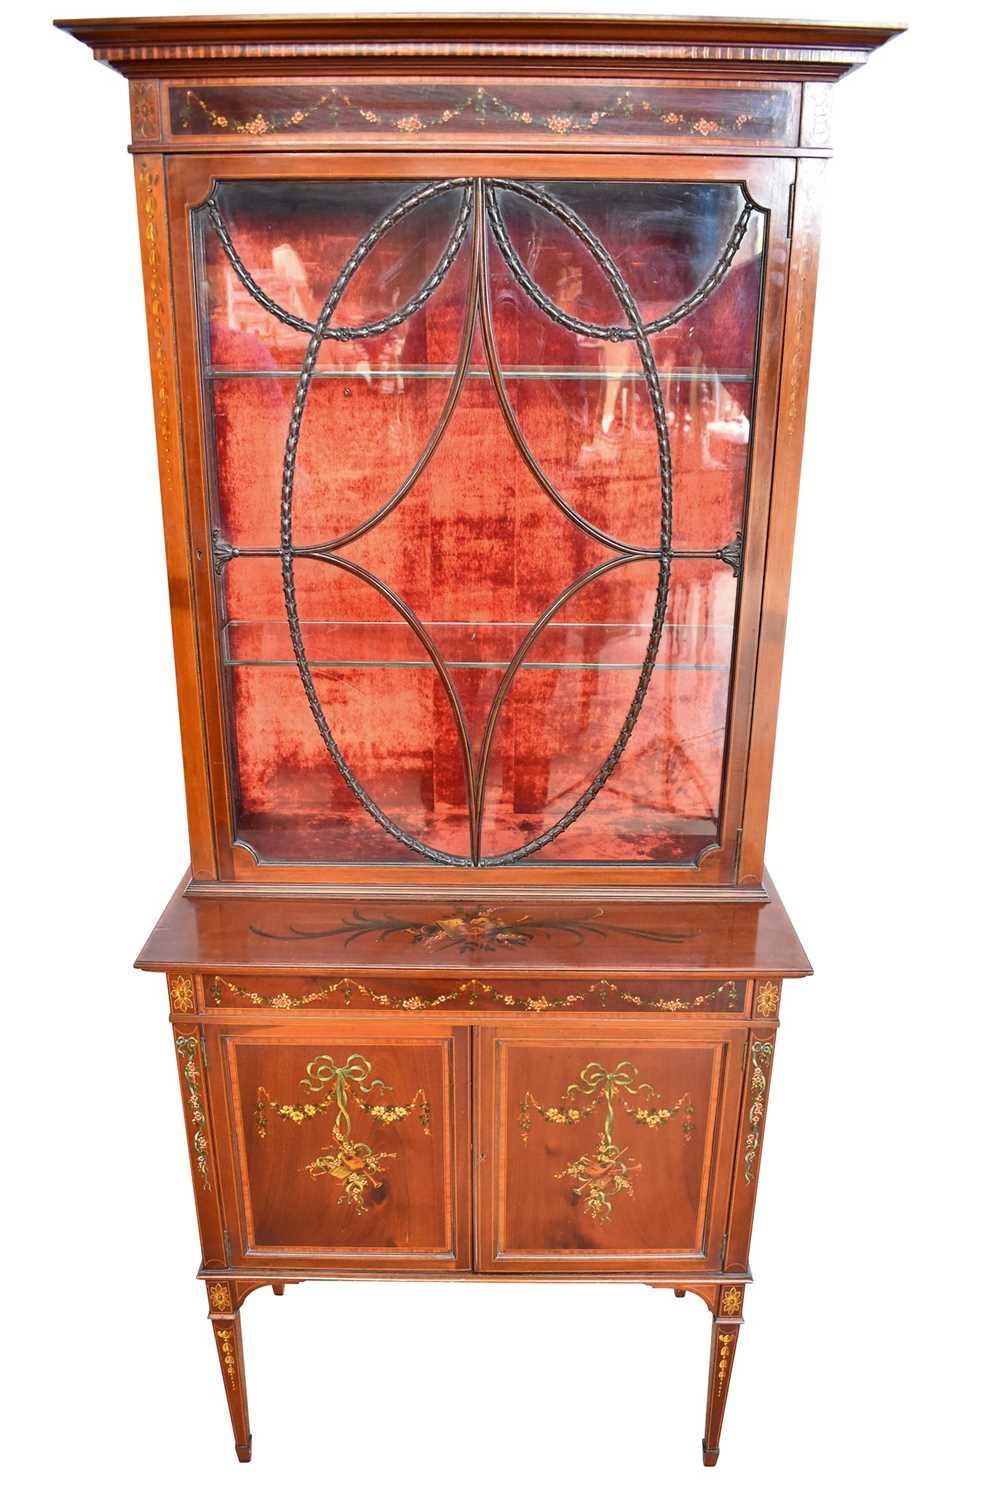 Edwardian satinwood and polychrome painted display cabinet